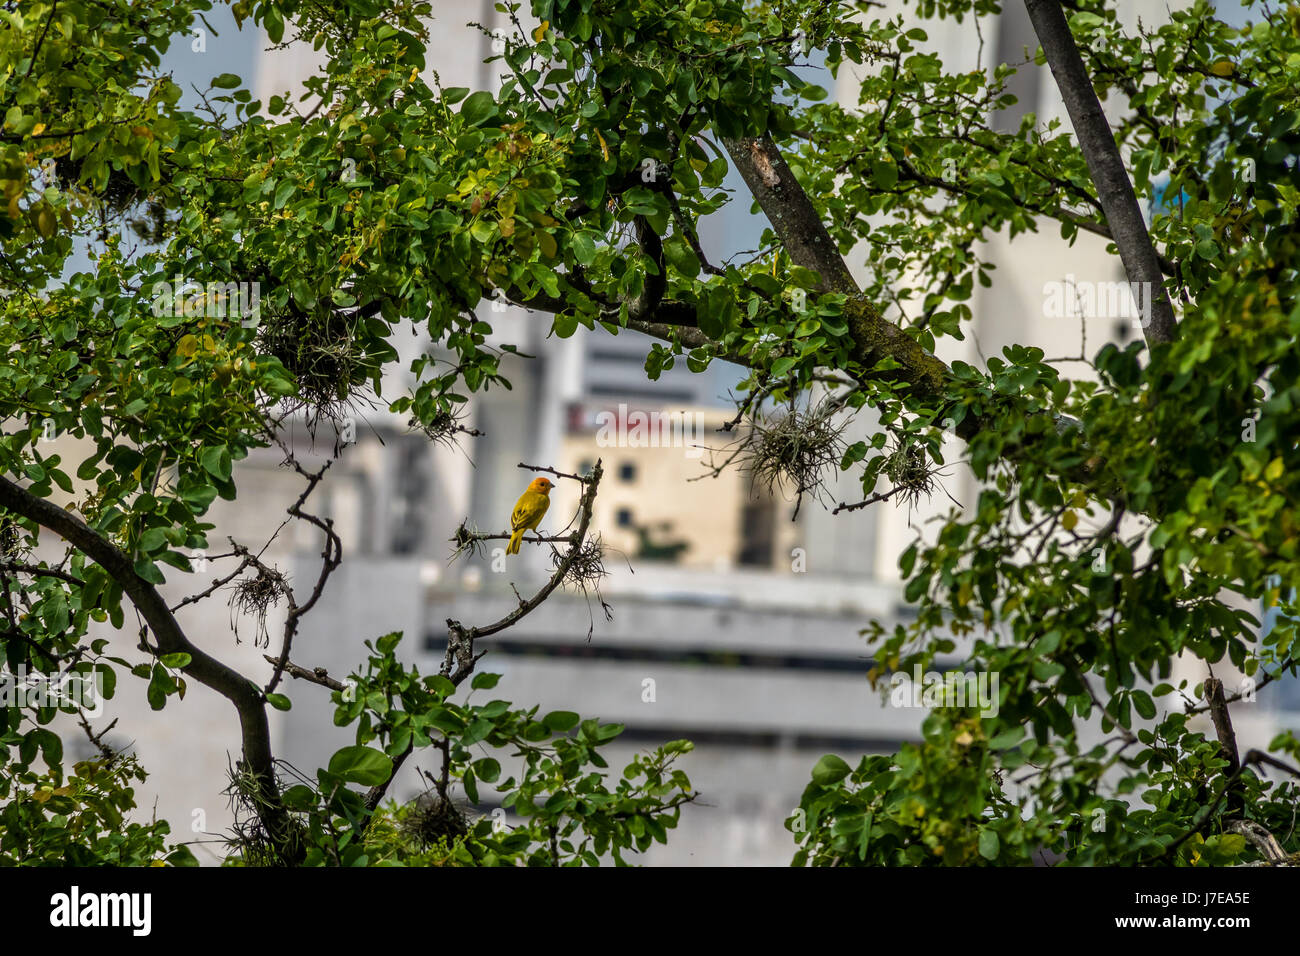 Smal yellow bird Male Orange-fronted Yellow Finch (Sicalis columbiana) in a tree looking to the city  - Cali, Colombia Stock Photo